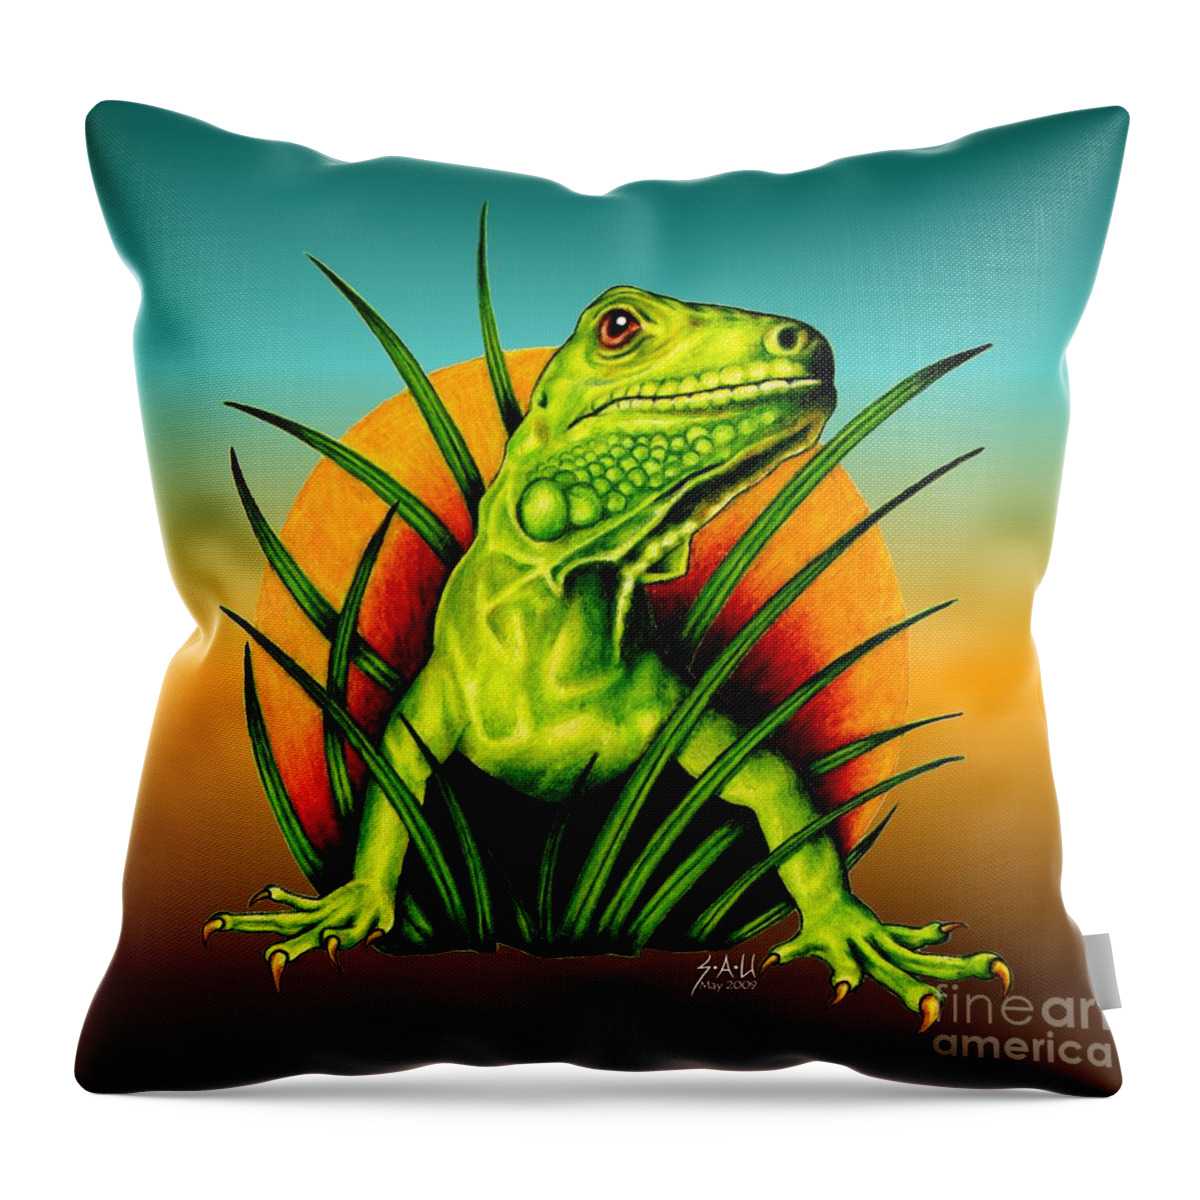 Portrait Throw Pillow featuring the drawing Good Morning World by Sheryl Unwin